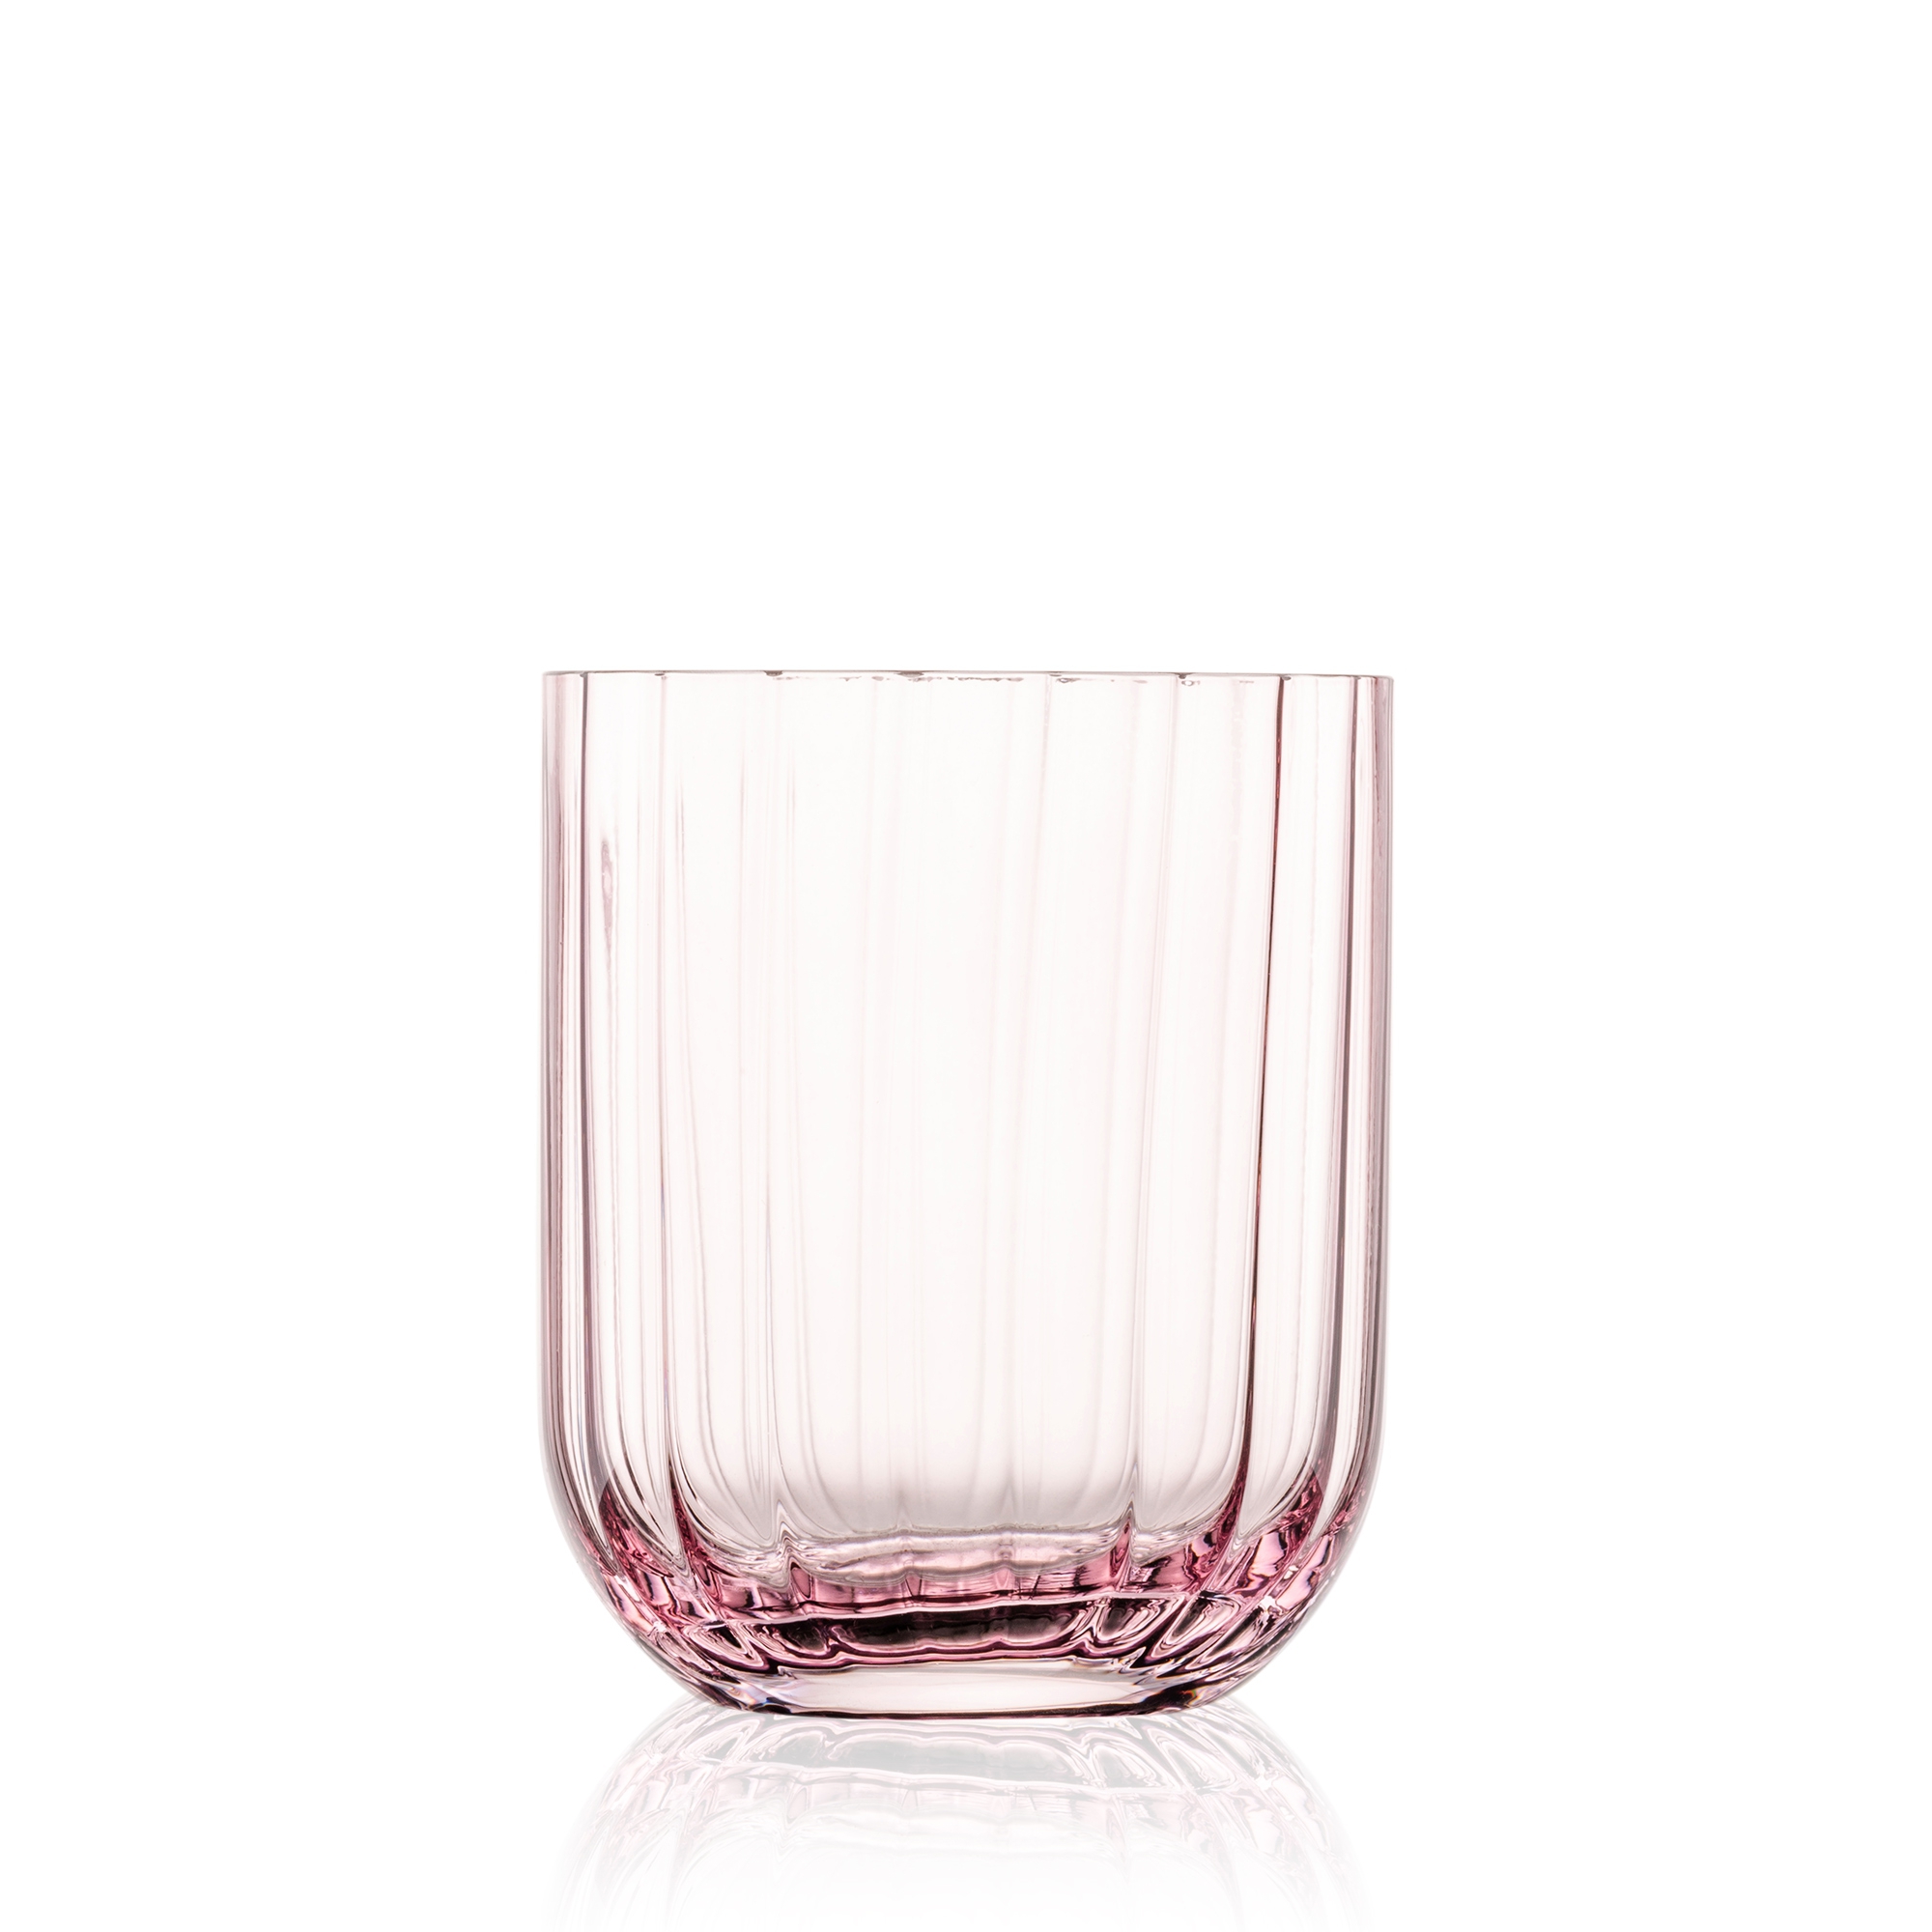 Zwiesel Glass - Vase Dialogue 124 lilac